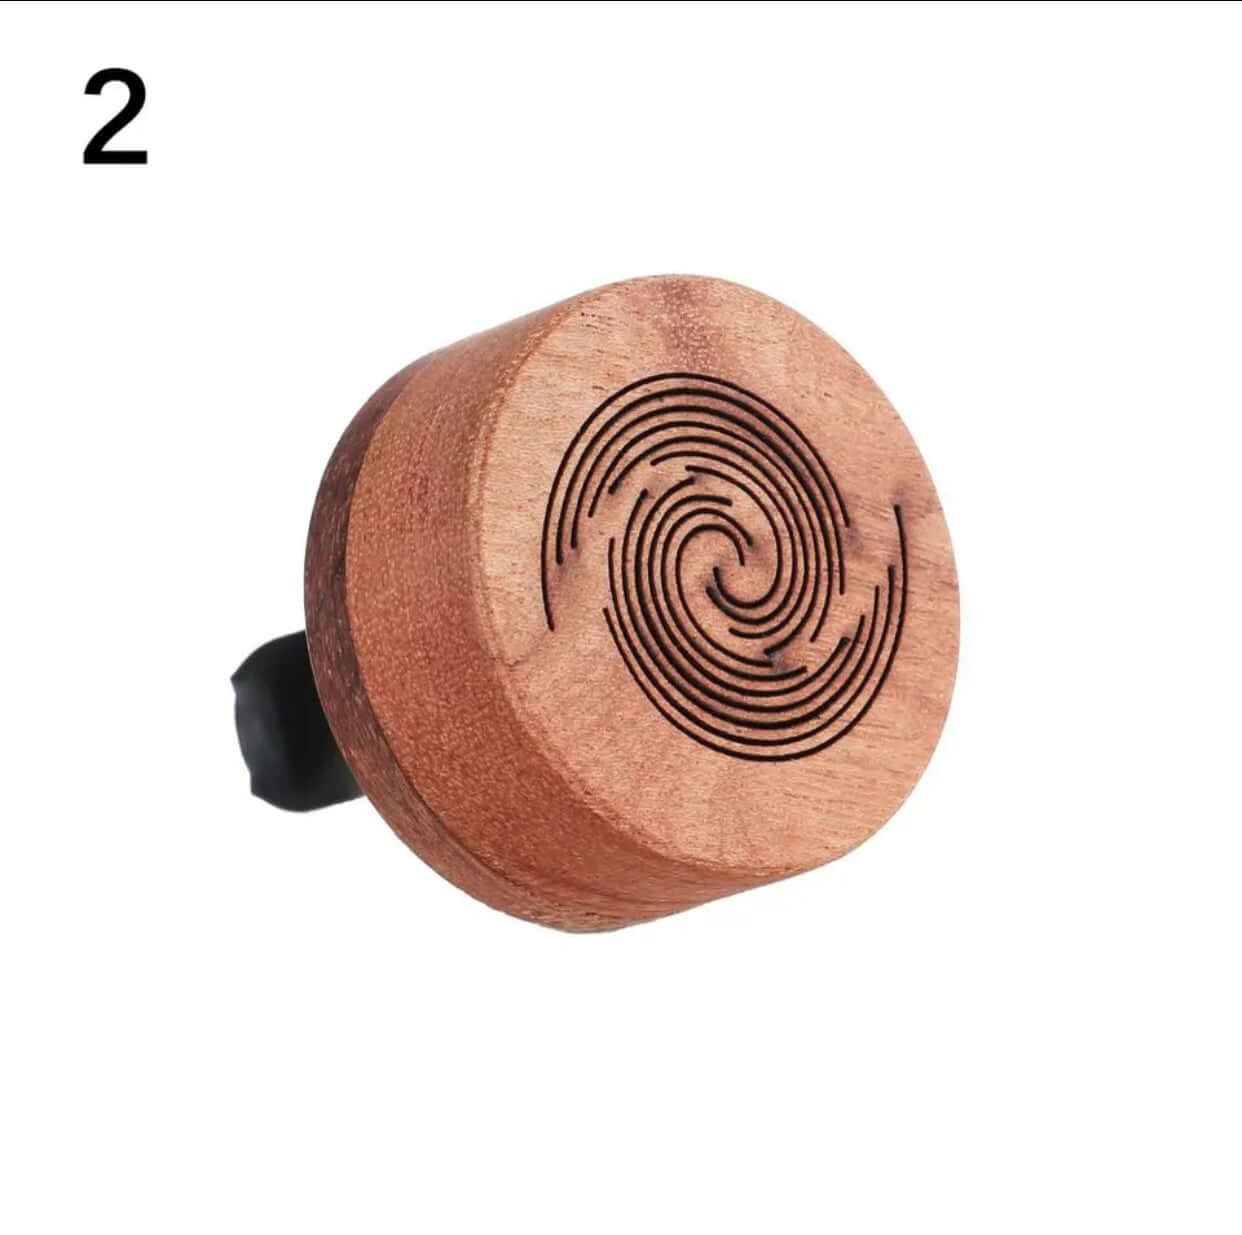 Noble wood aroma diffuser for the car: A touch of nature in your vehicle